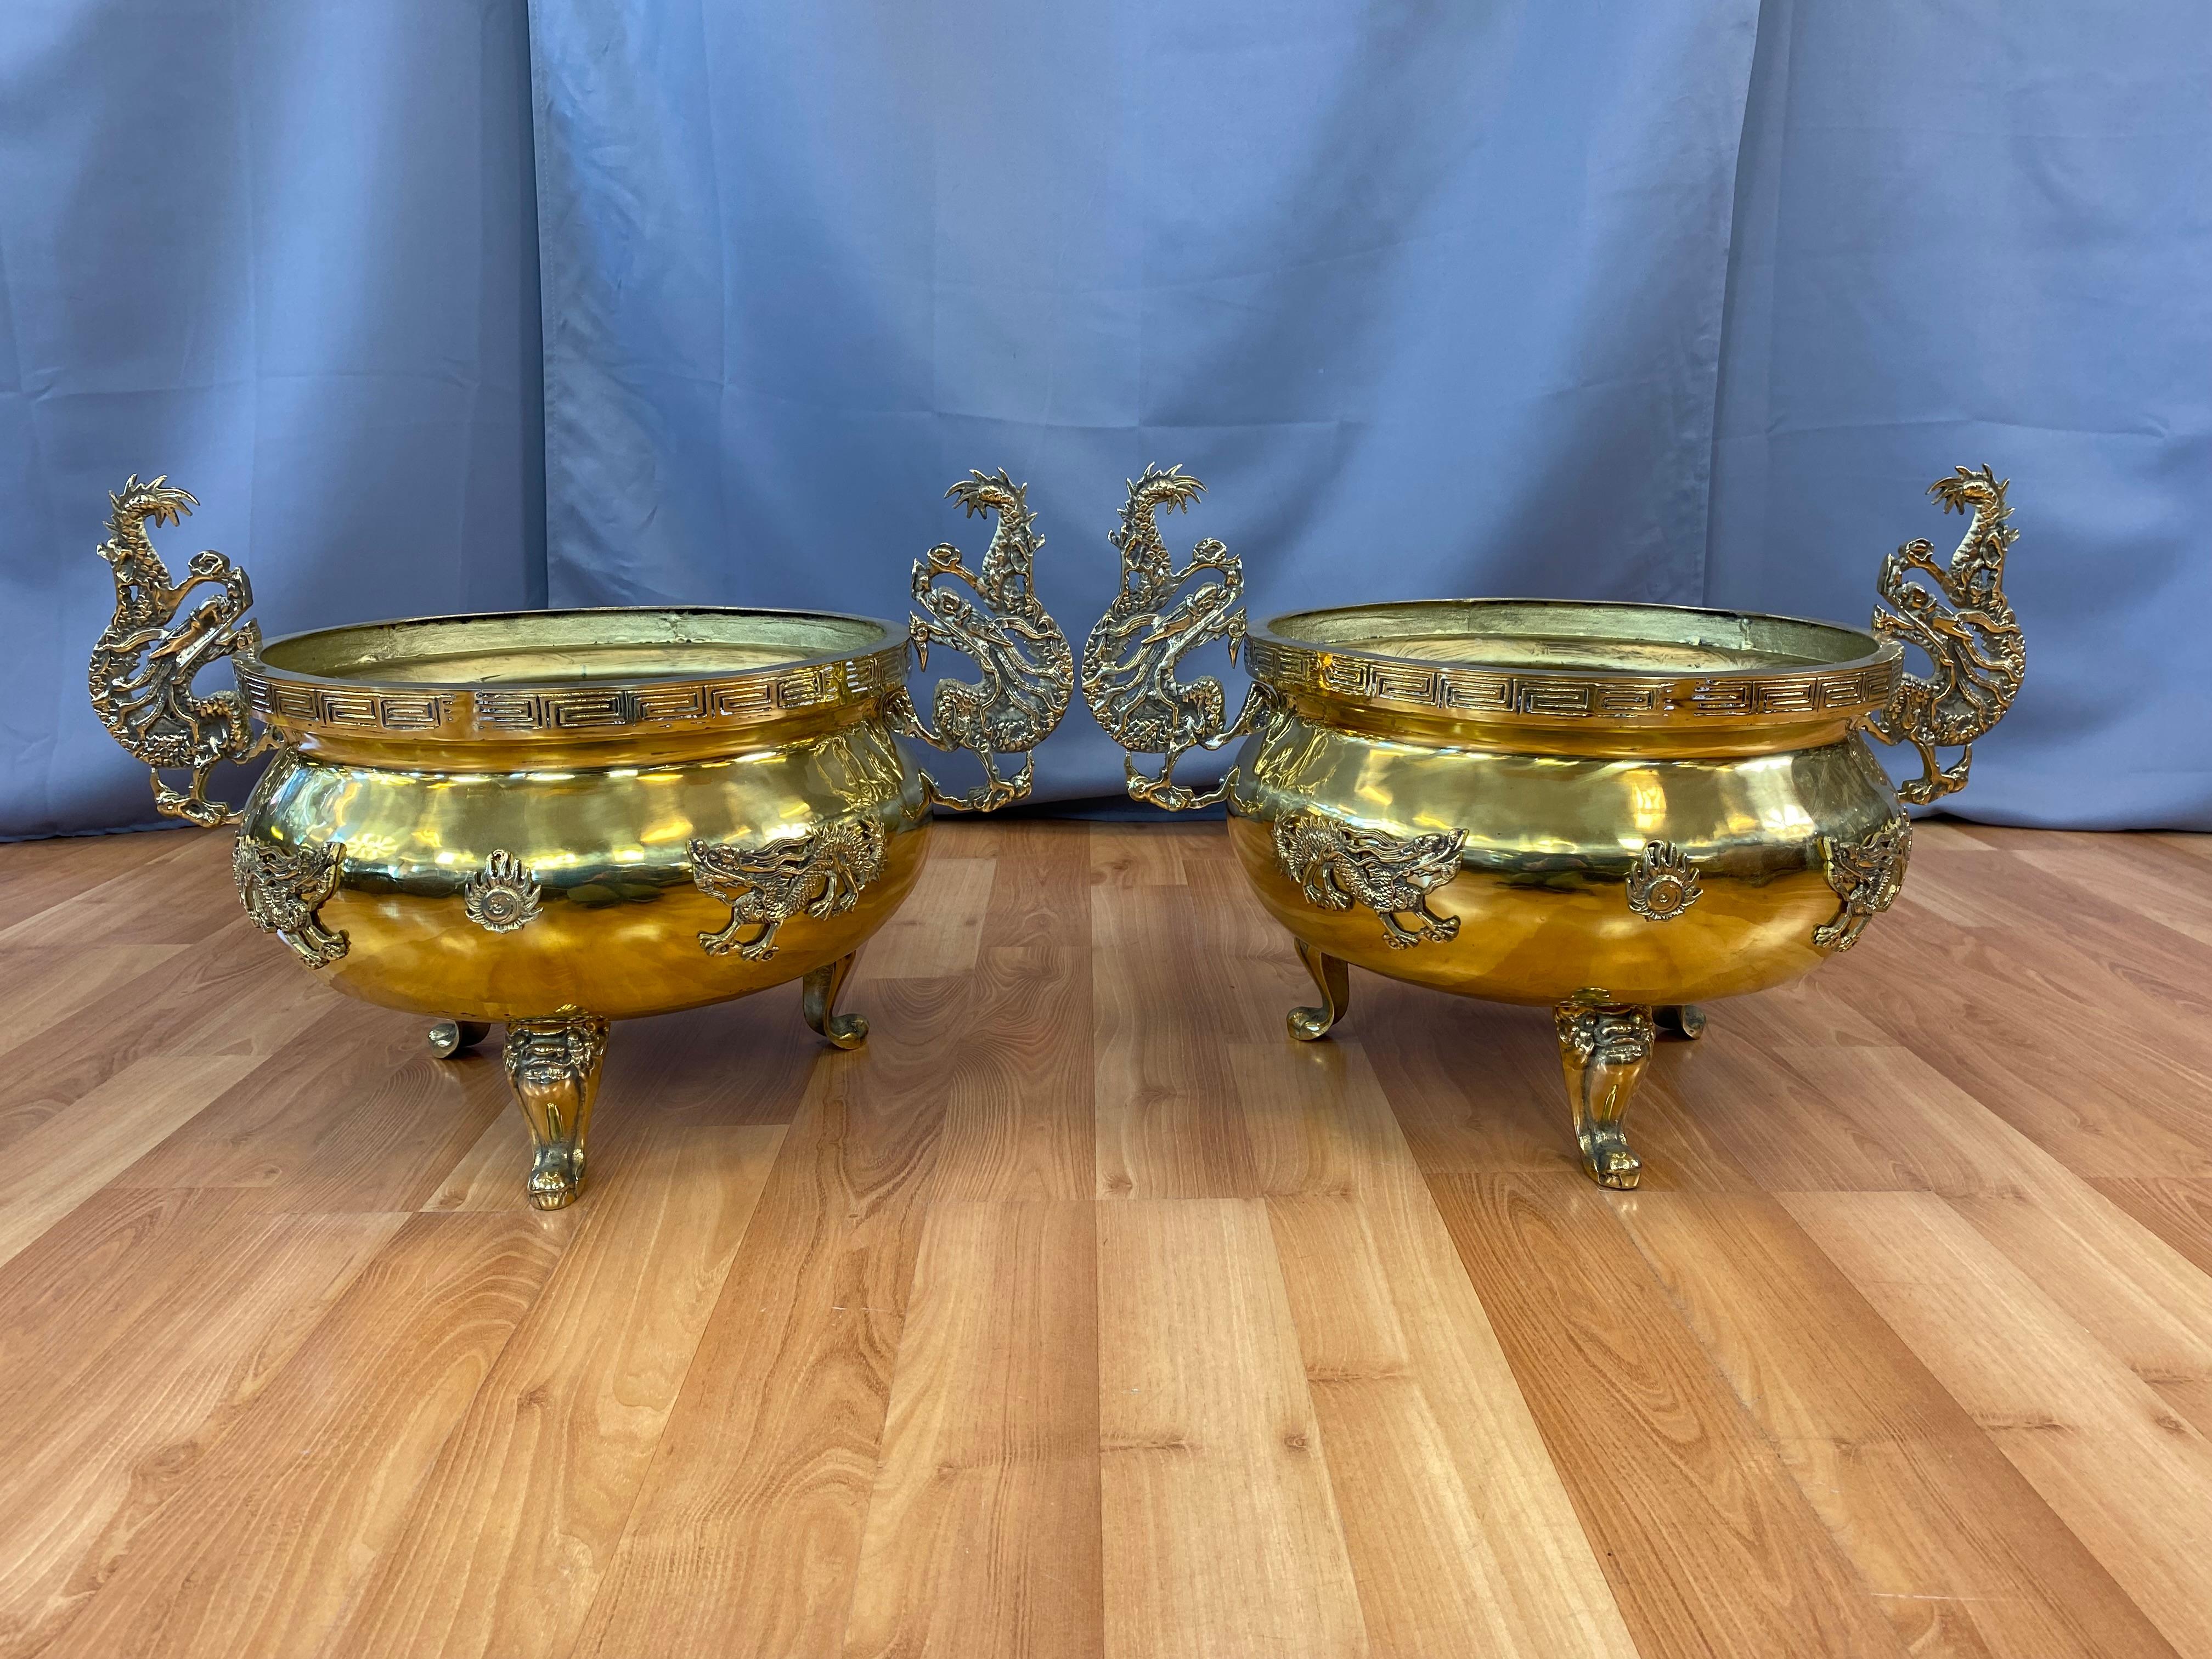 A pair of Monumental Brass Chinese style jardinières. 
Chinese styling throughout, from the dragons on the feet and sides, a sun on front to the handles.
Main body has a extra layer of Brass on the bottom, which gives more support.

Has no